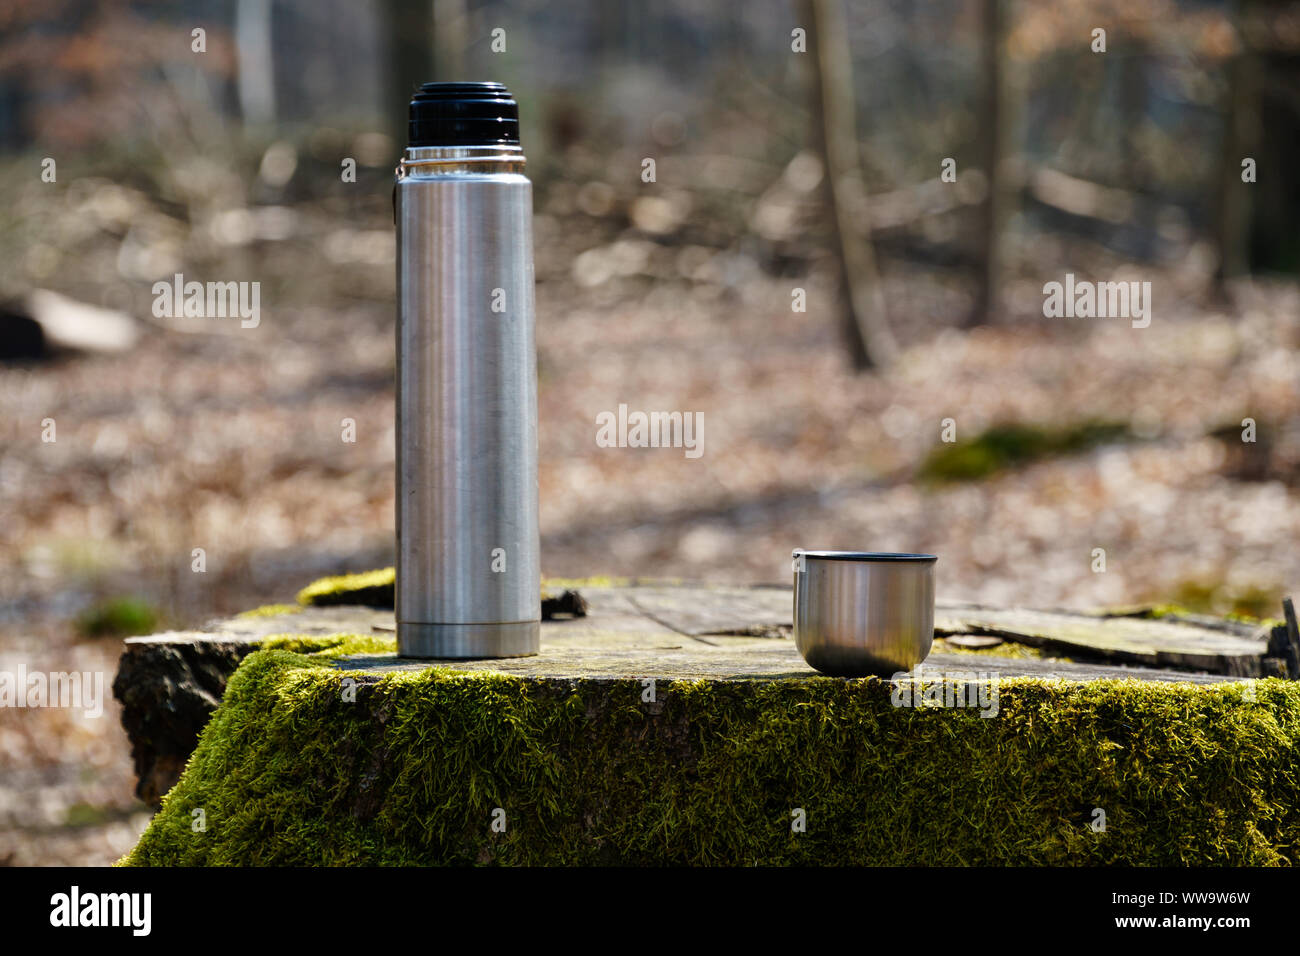 https://c8.alamy.com/comp/WW9W6W/thermos-bottle-and-a-cup-of-coffee-or-tea-on-a-moss-covered-tree-stump-in-sunlight-in-the-woods-head-on-view-horizontal-format-WW9W6W.jpg